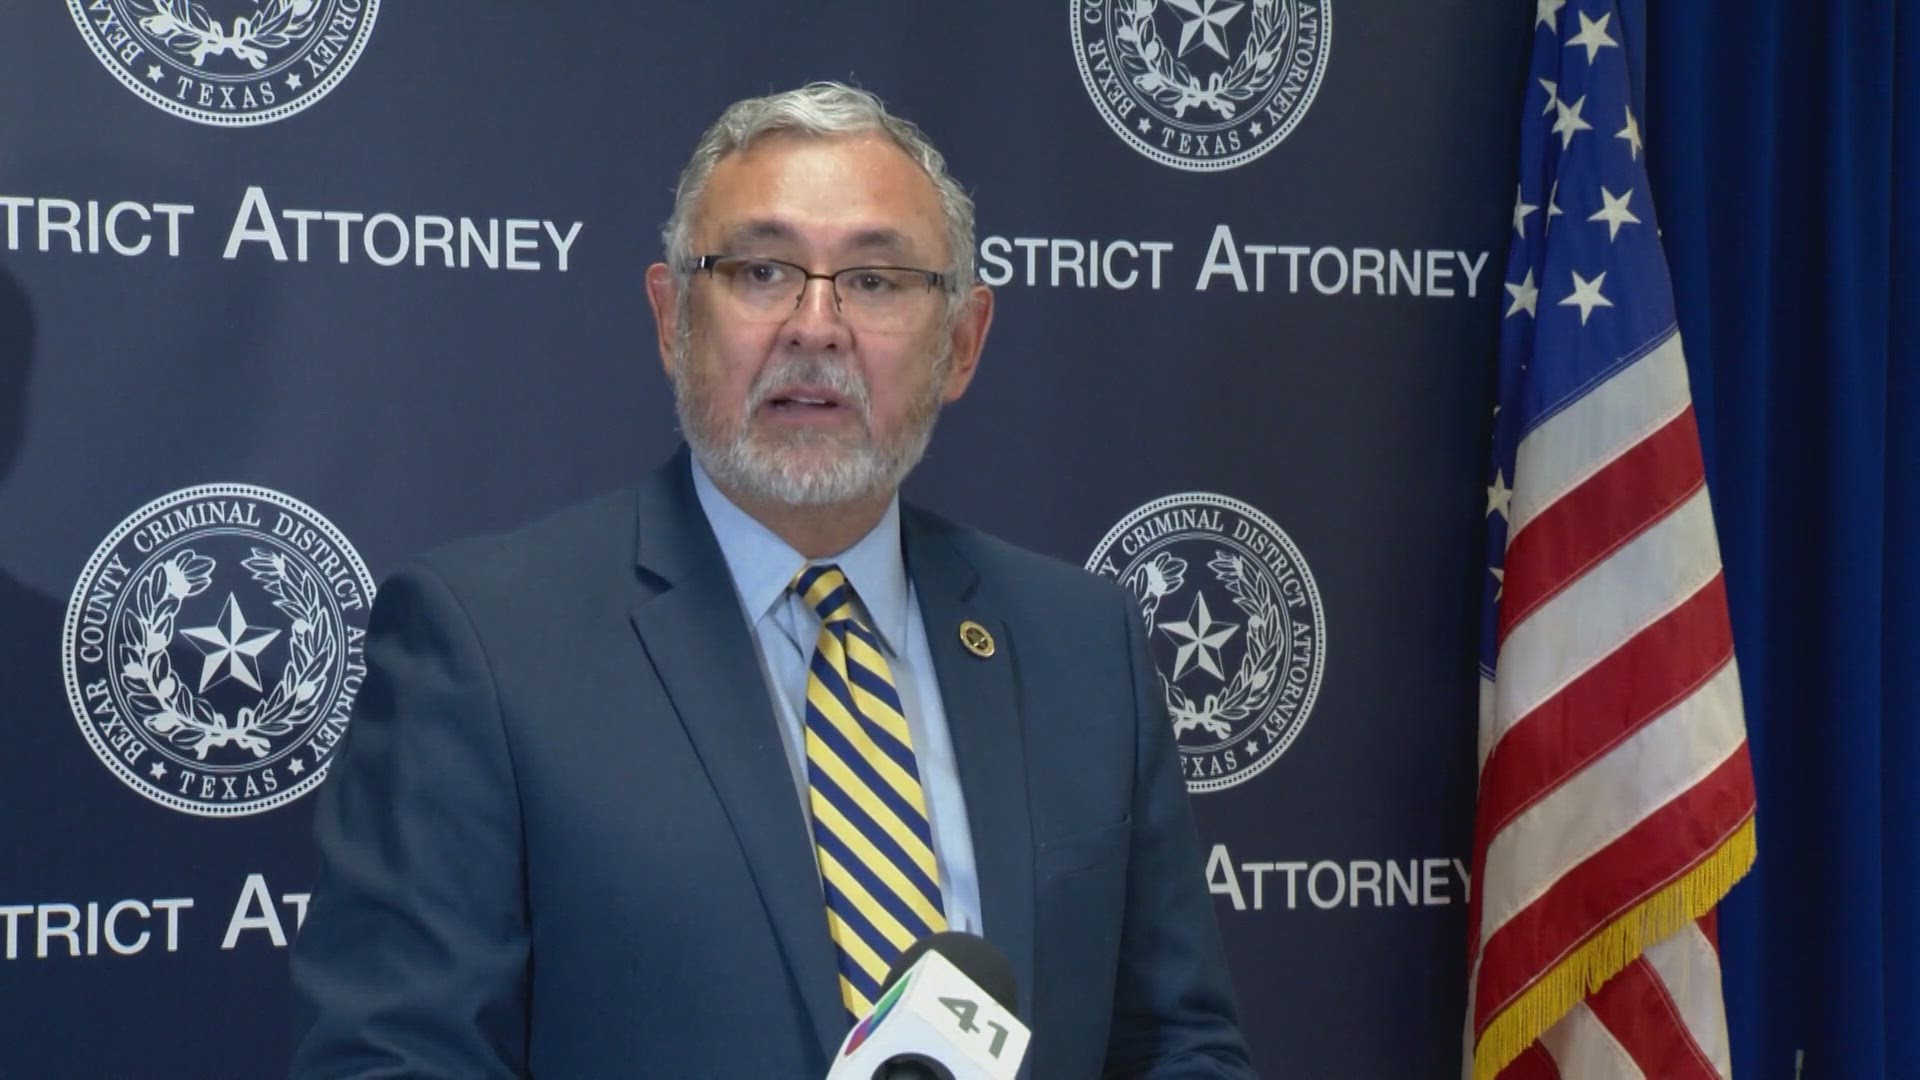 After a series of shootings between suspects and police, DA Joe Gonzales says his offices has been aggressive when it comes to prosecuting violent crimes.